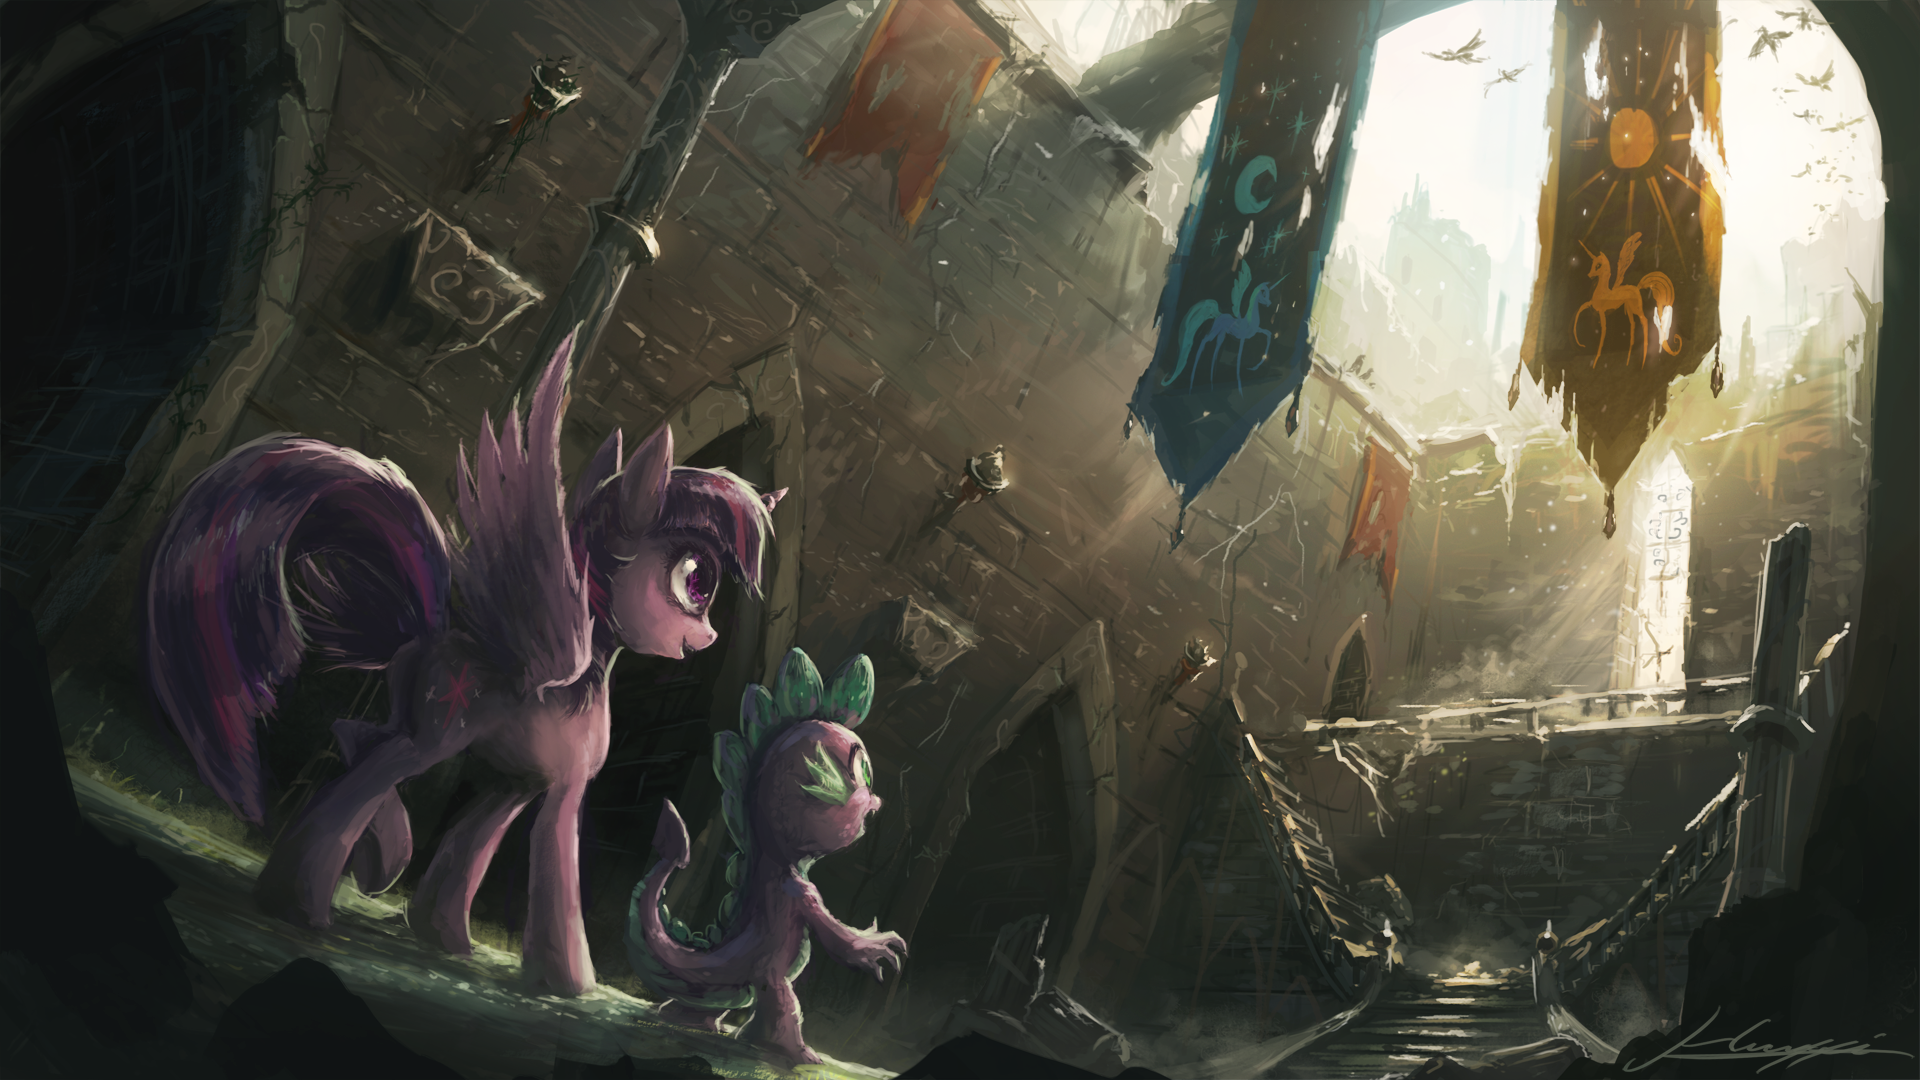 MLP - Memento of the Times Long Gone by Huussii